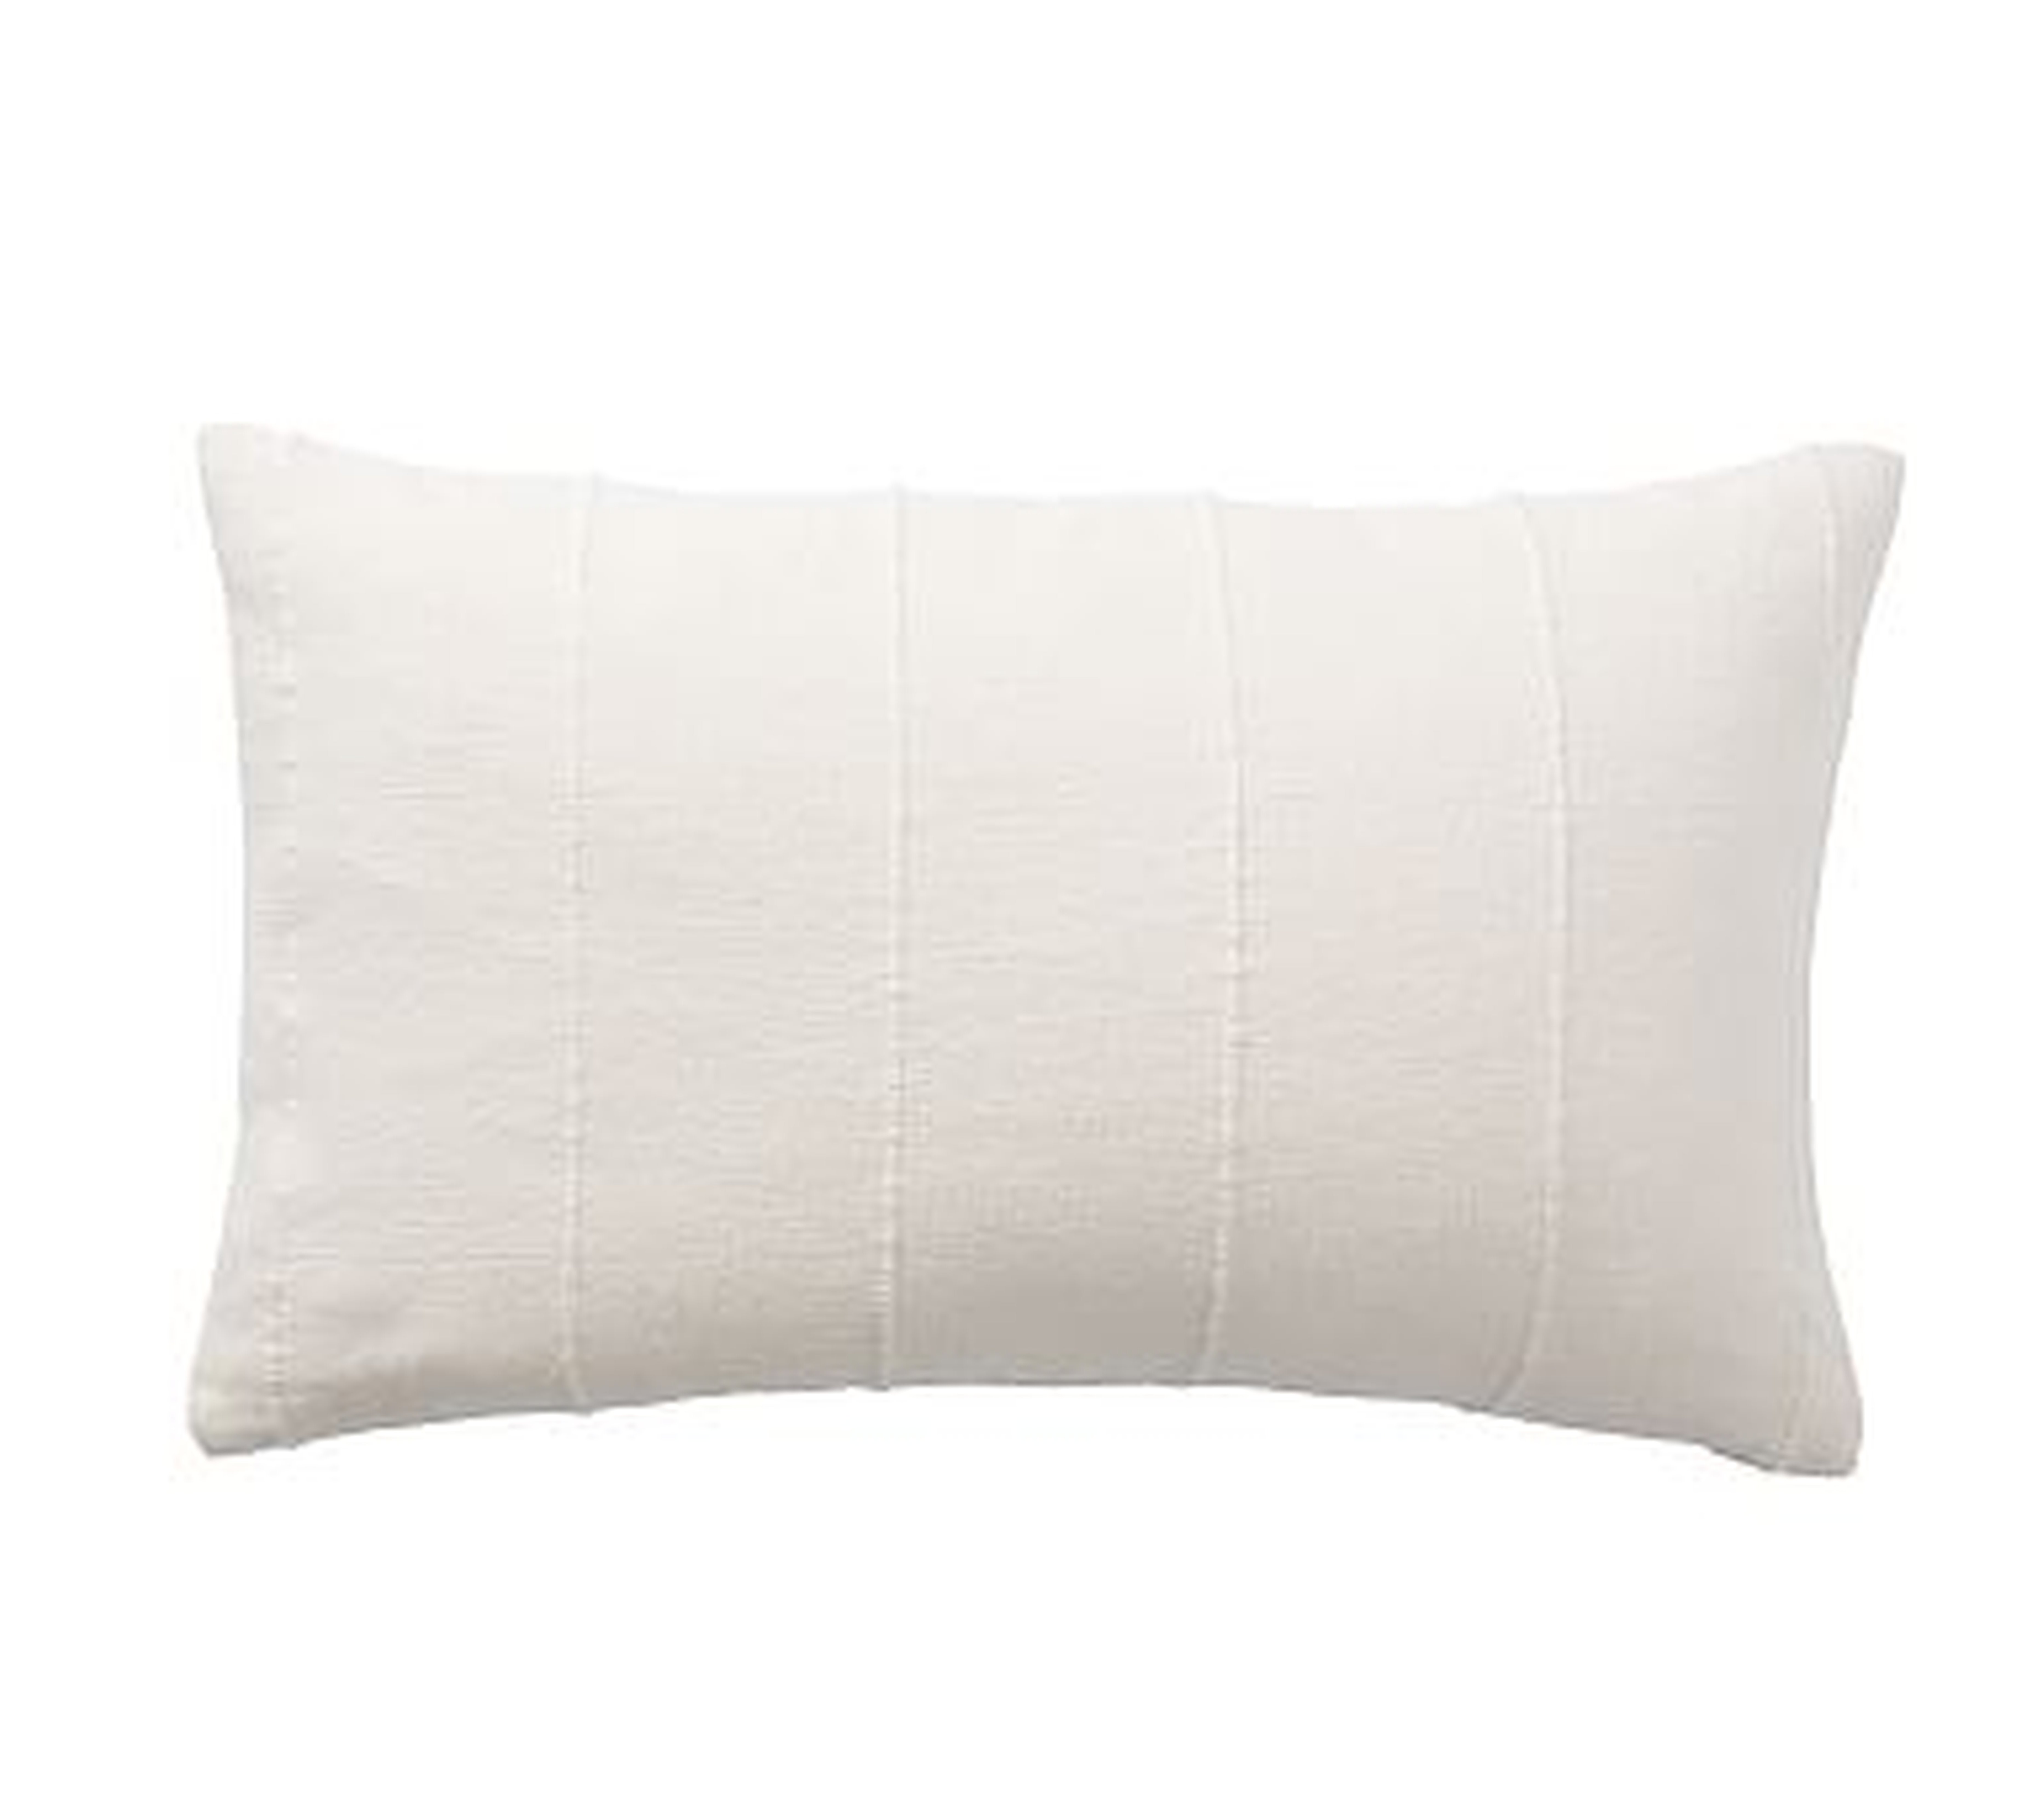 Mudcloth Flax Lumbar Pillow Cover, 16x26", Ivory - Pottery Barn